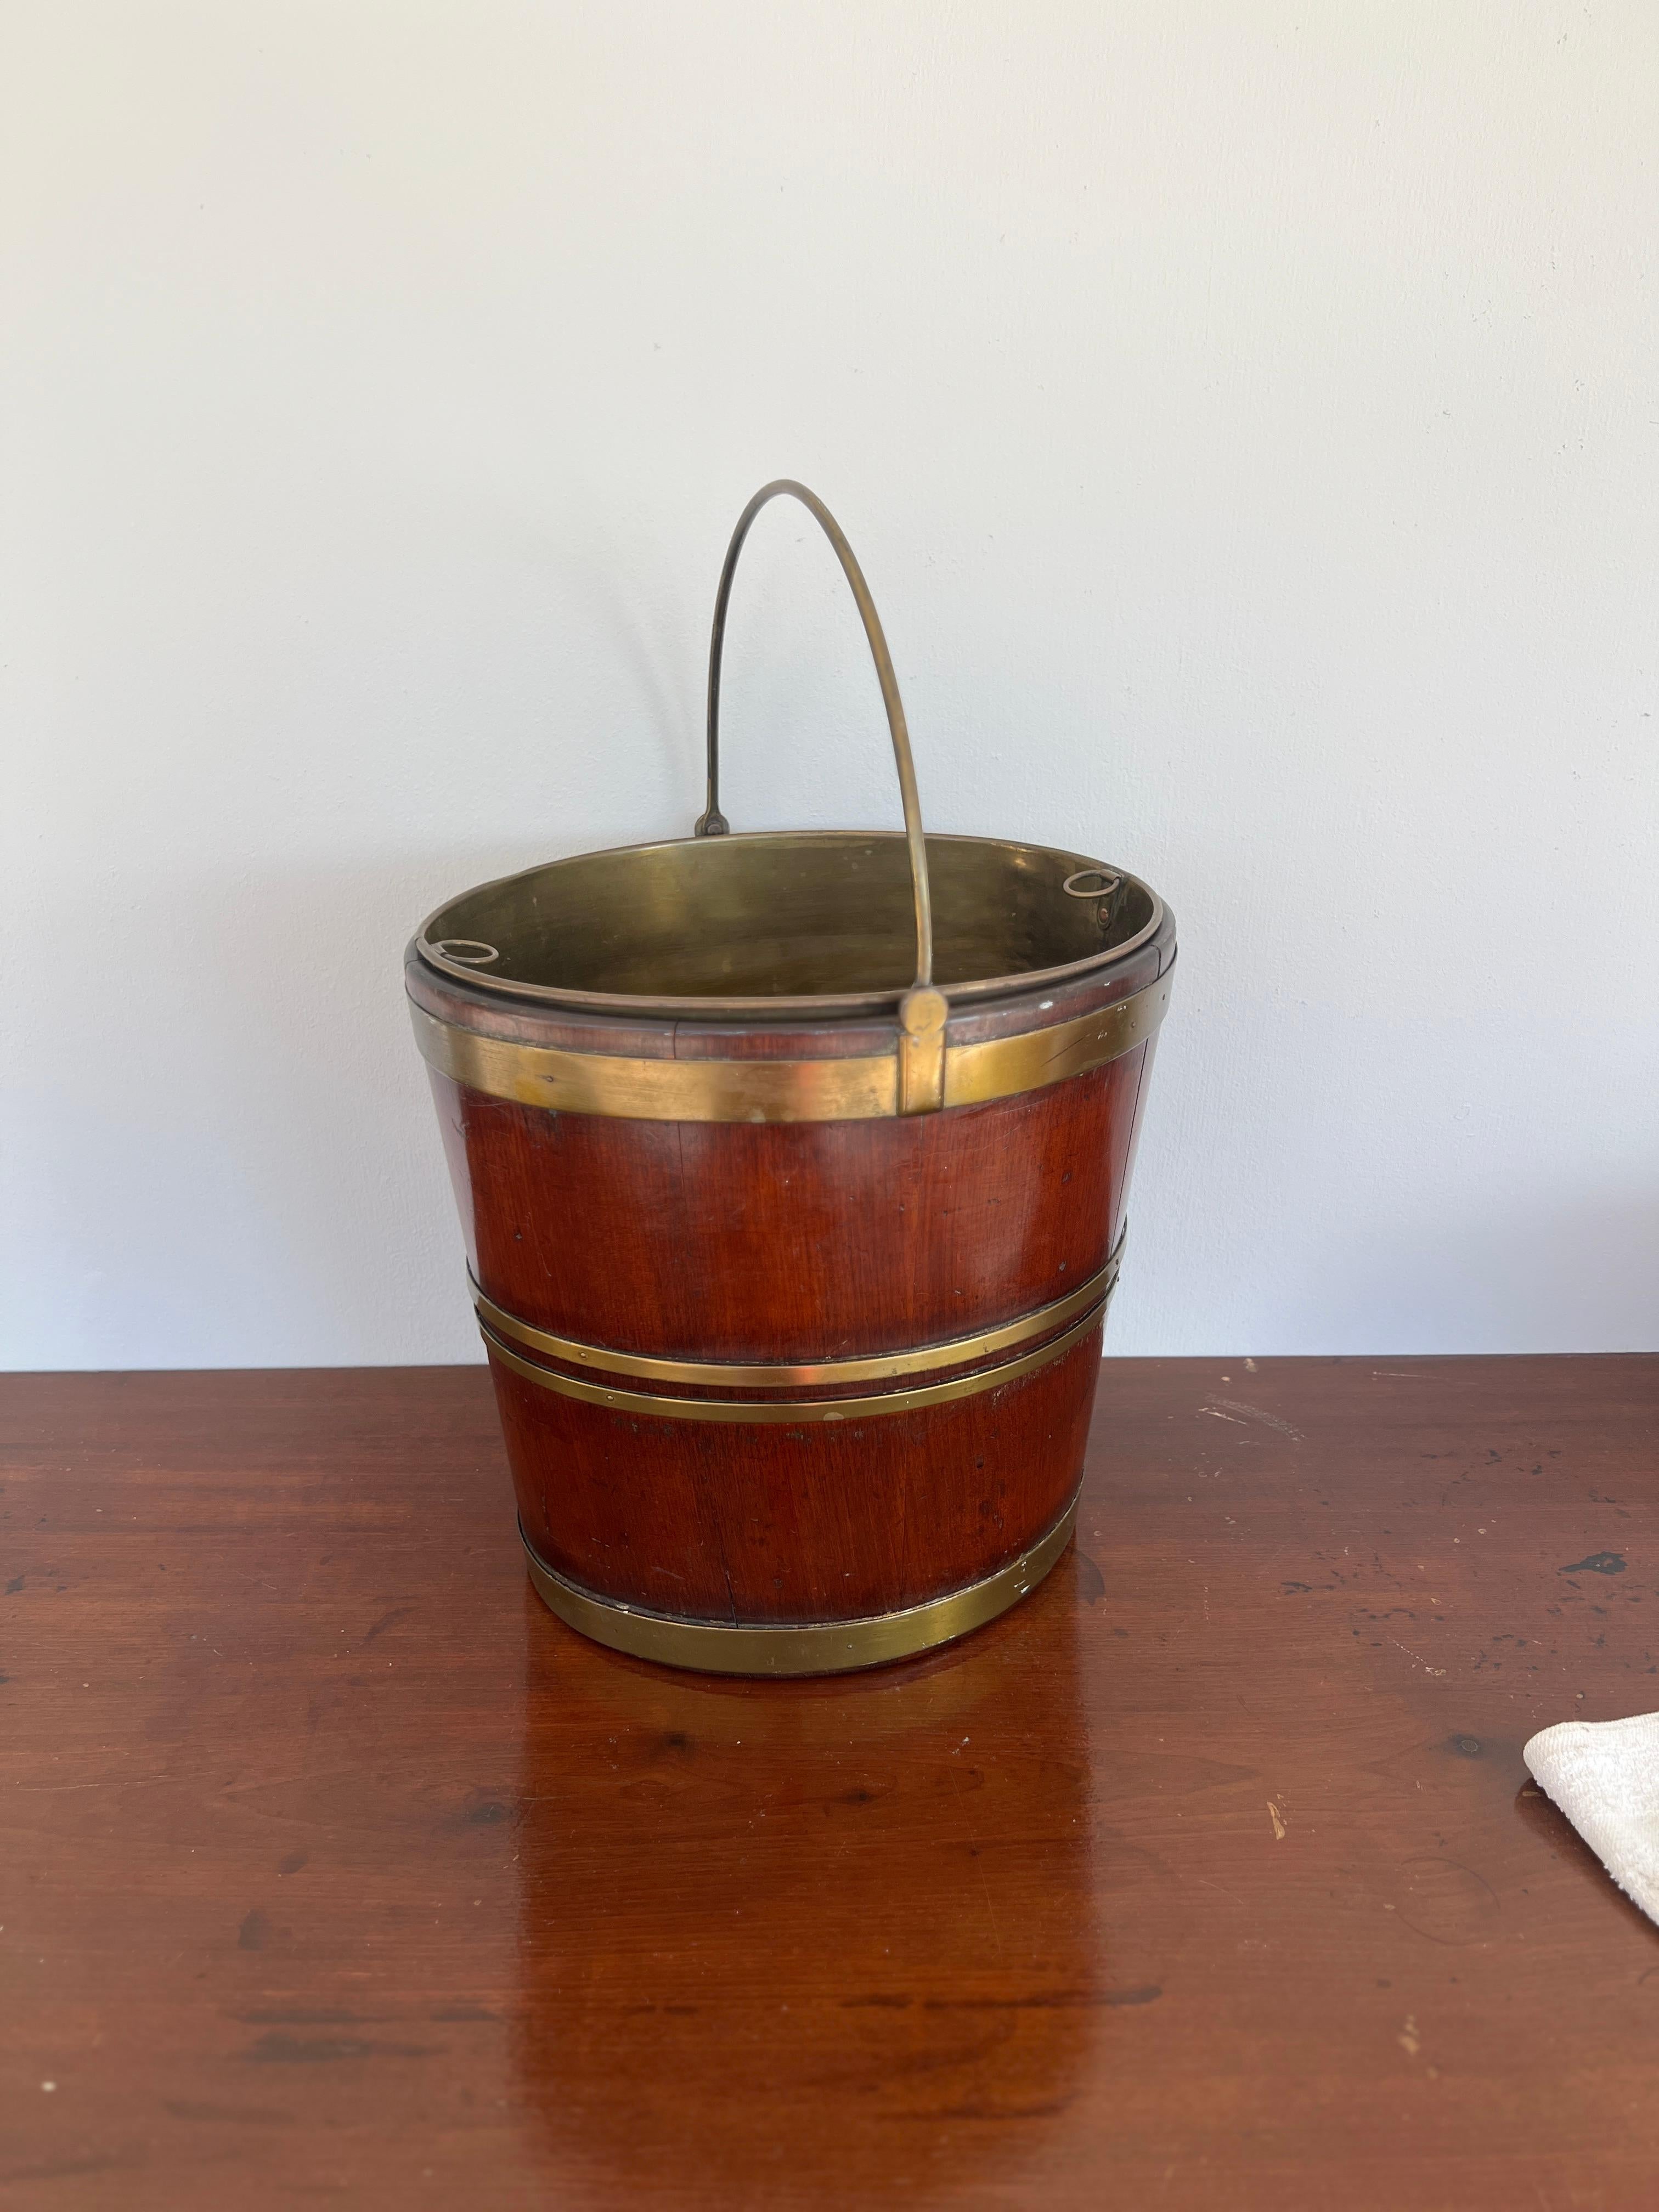 Continental, likely English.

A George III circa 1800 peat, turf, coal or kindling bucket of near round form and confirming body mounted with brass straps. A handle is affixed and the original brass liner accompanies the bucket. Works great against